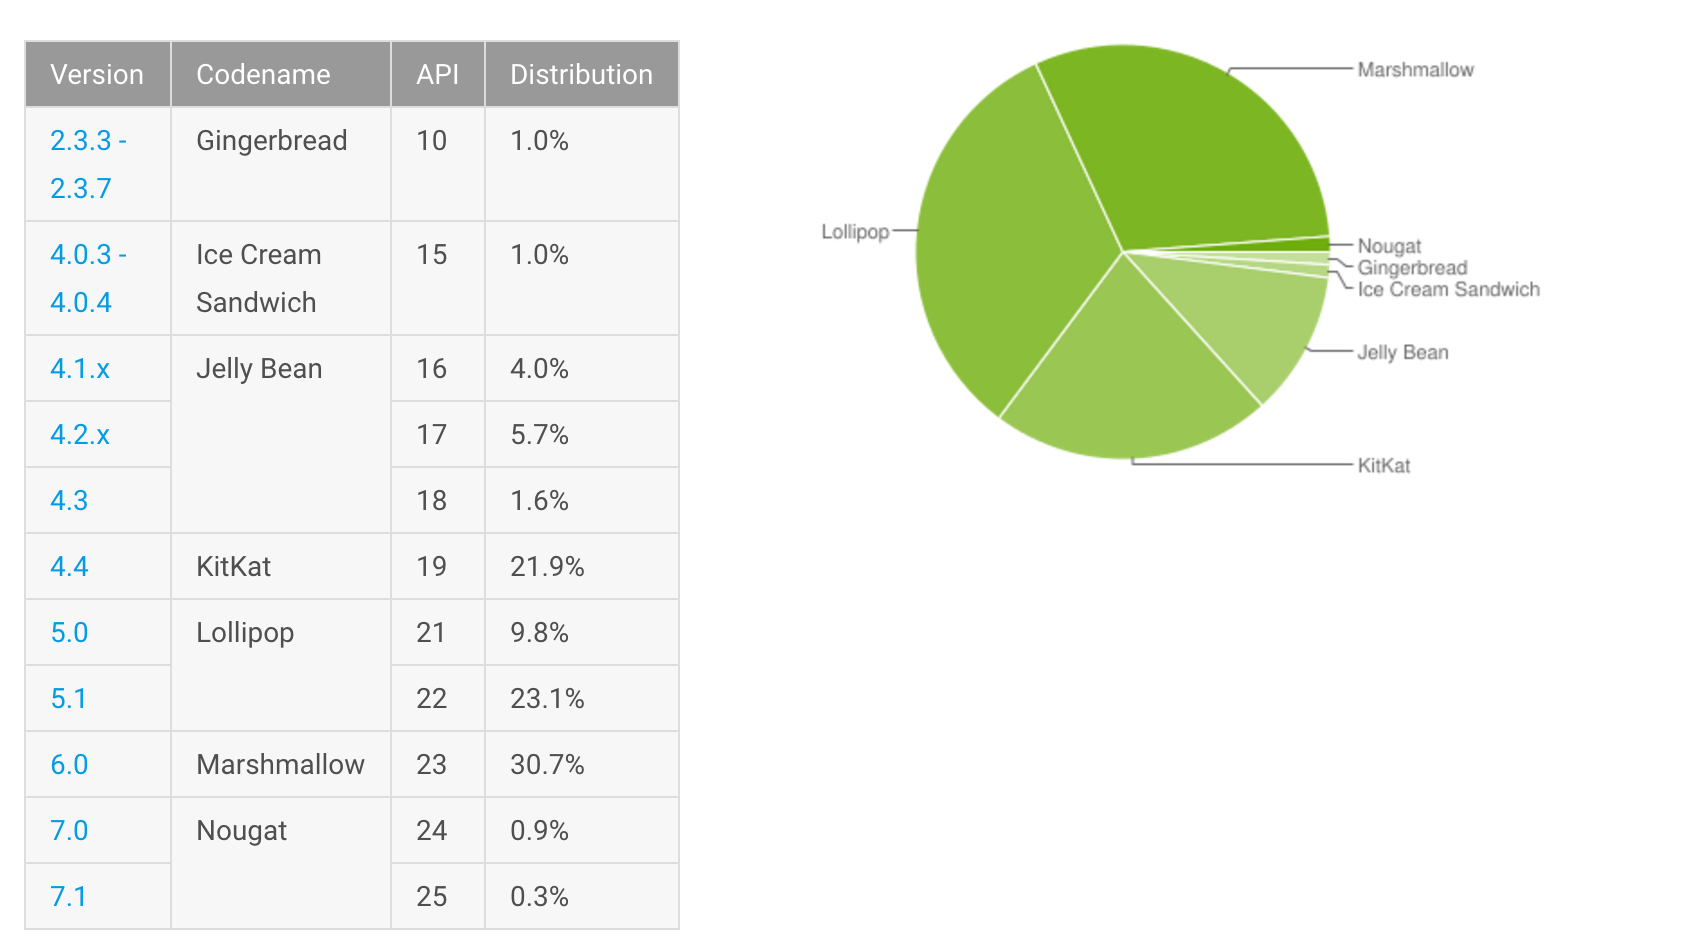 February Android distribution numbers